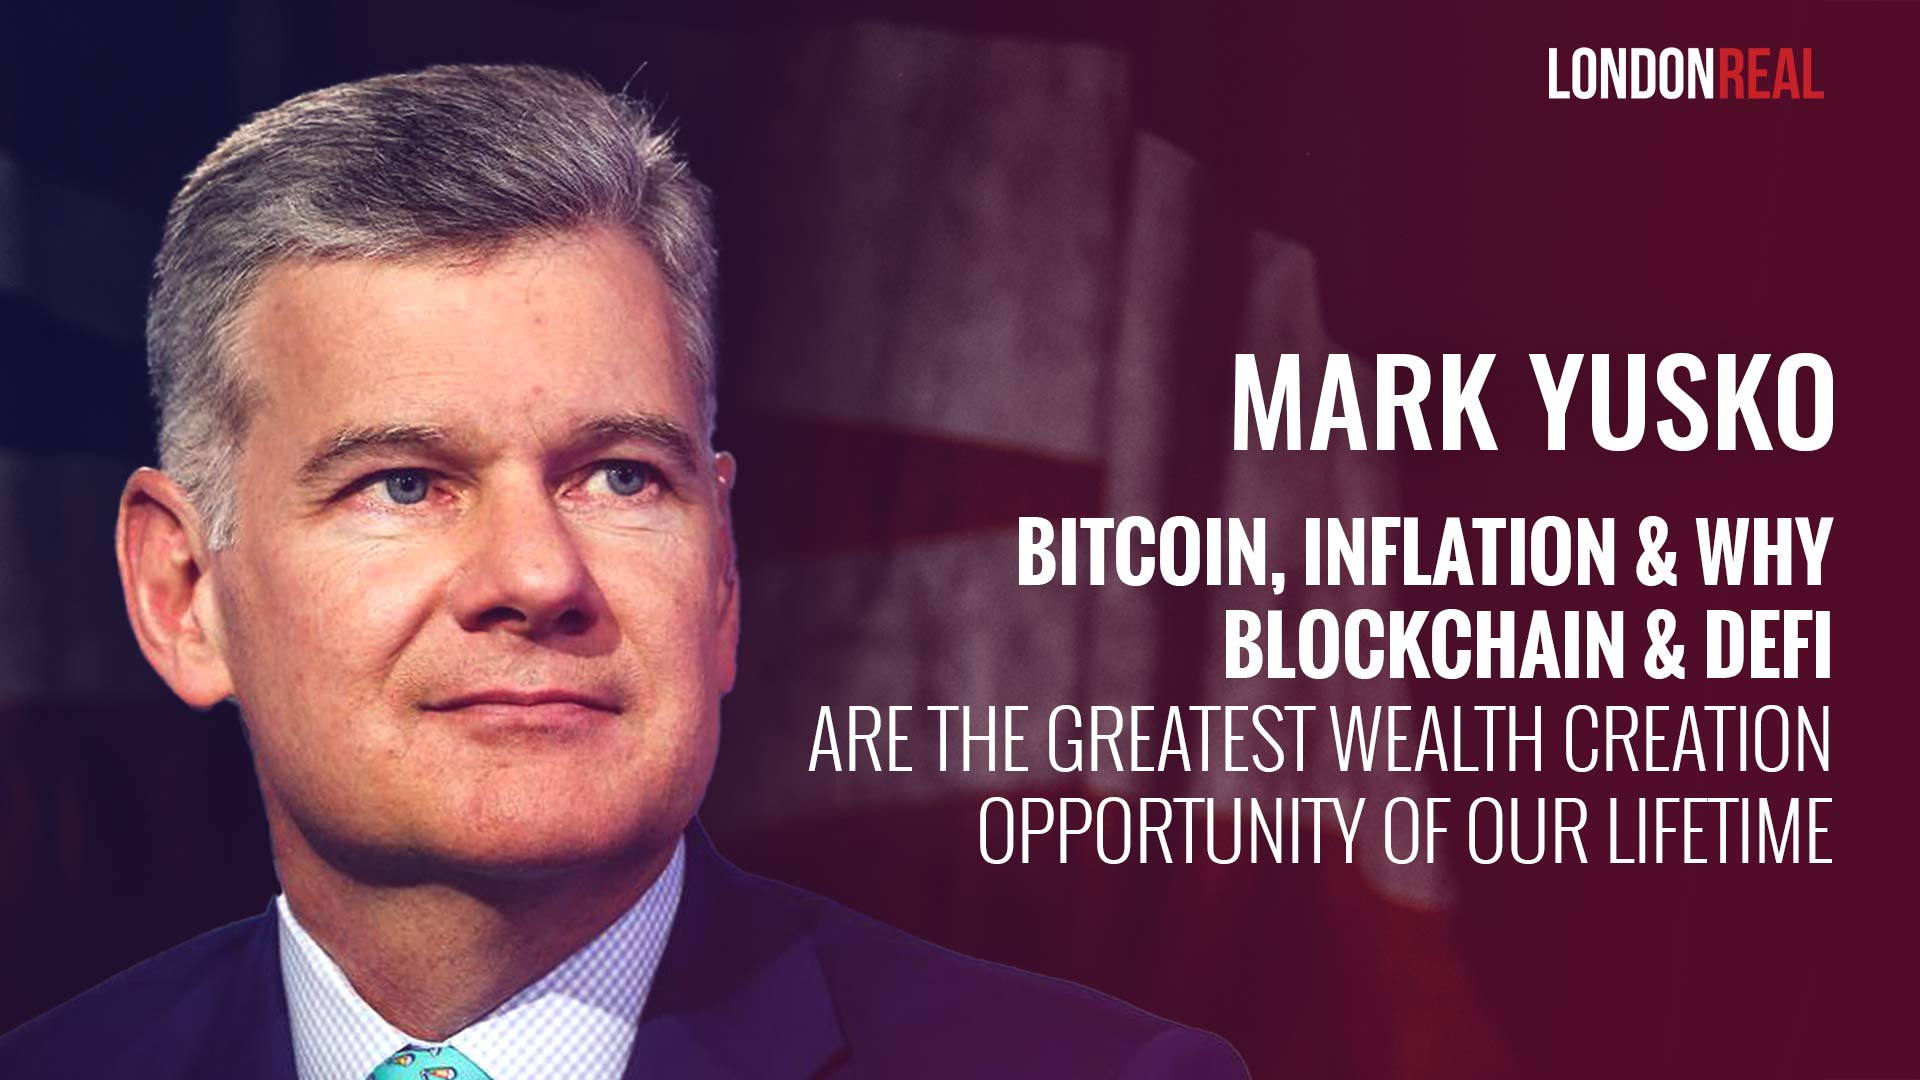 Mark Yusko - Bitcoin, Inflation & Why Blockchain & DeFi Are The Greatest Wealth Creation Opportunity Of Our Lifetime